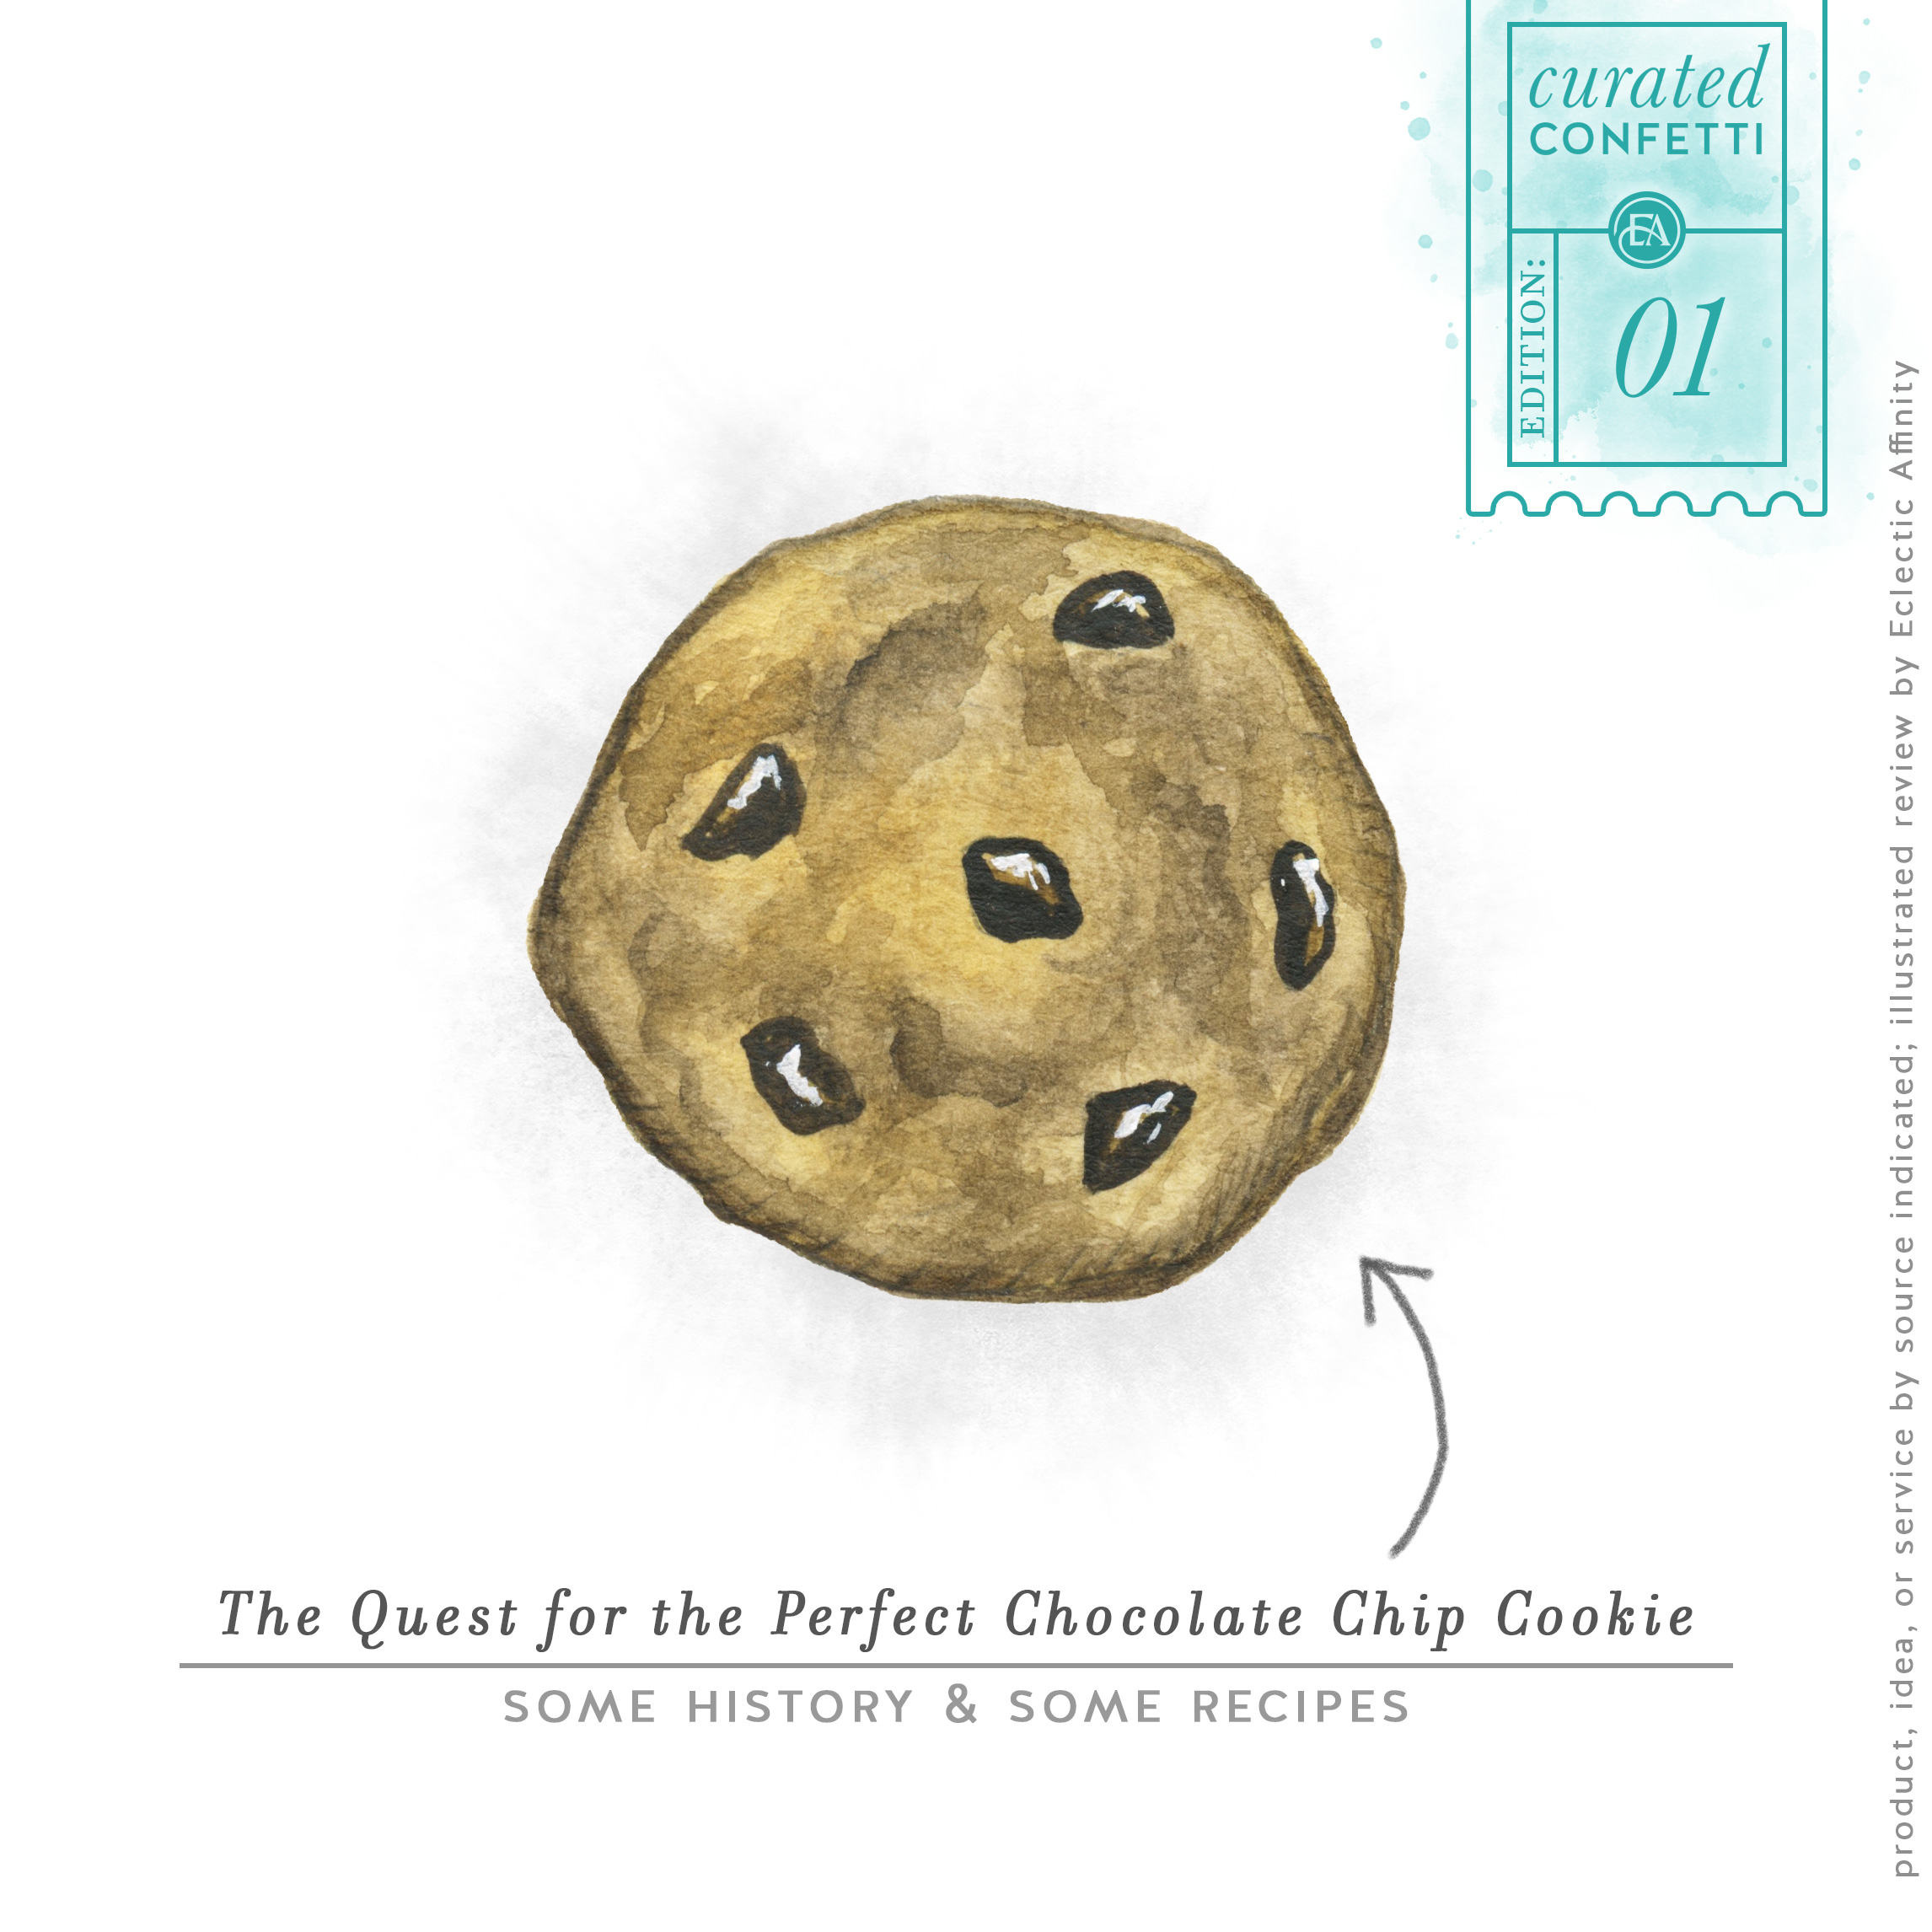 The quest for the Perfect Chocolate Chip Cookie - some history and some recipes.